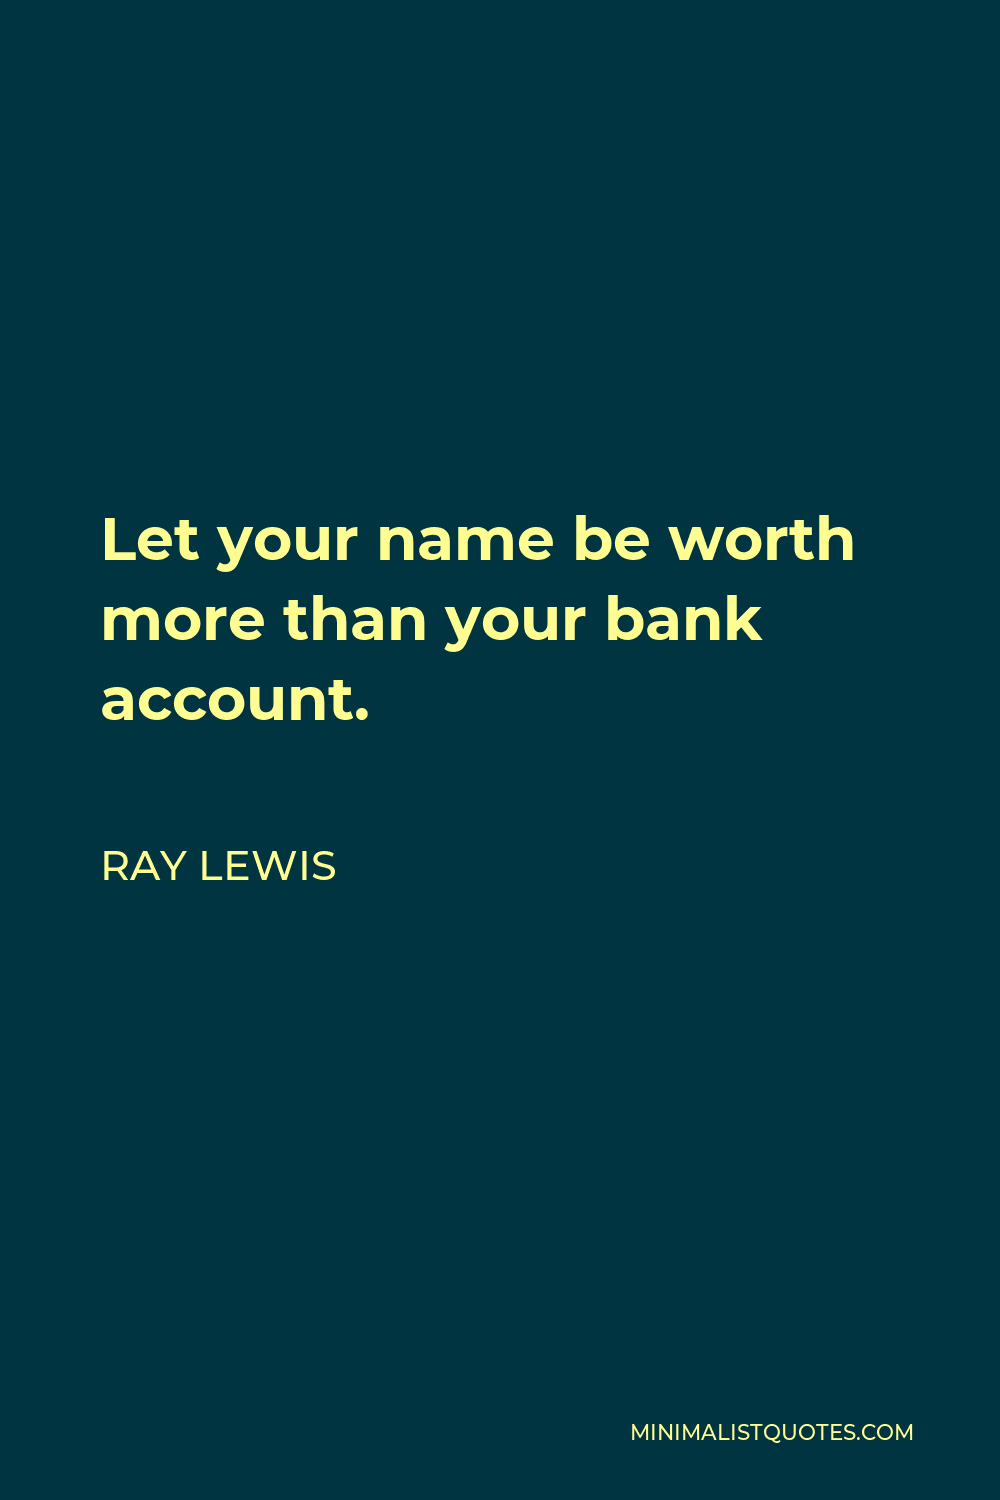 Ray Lewis Quote - Let your name be worth more than your bank account.